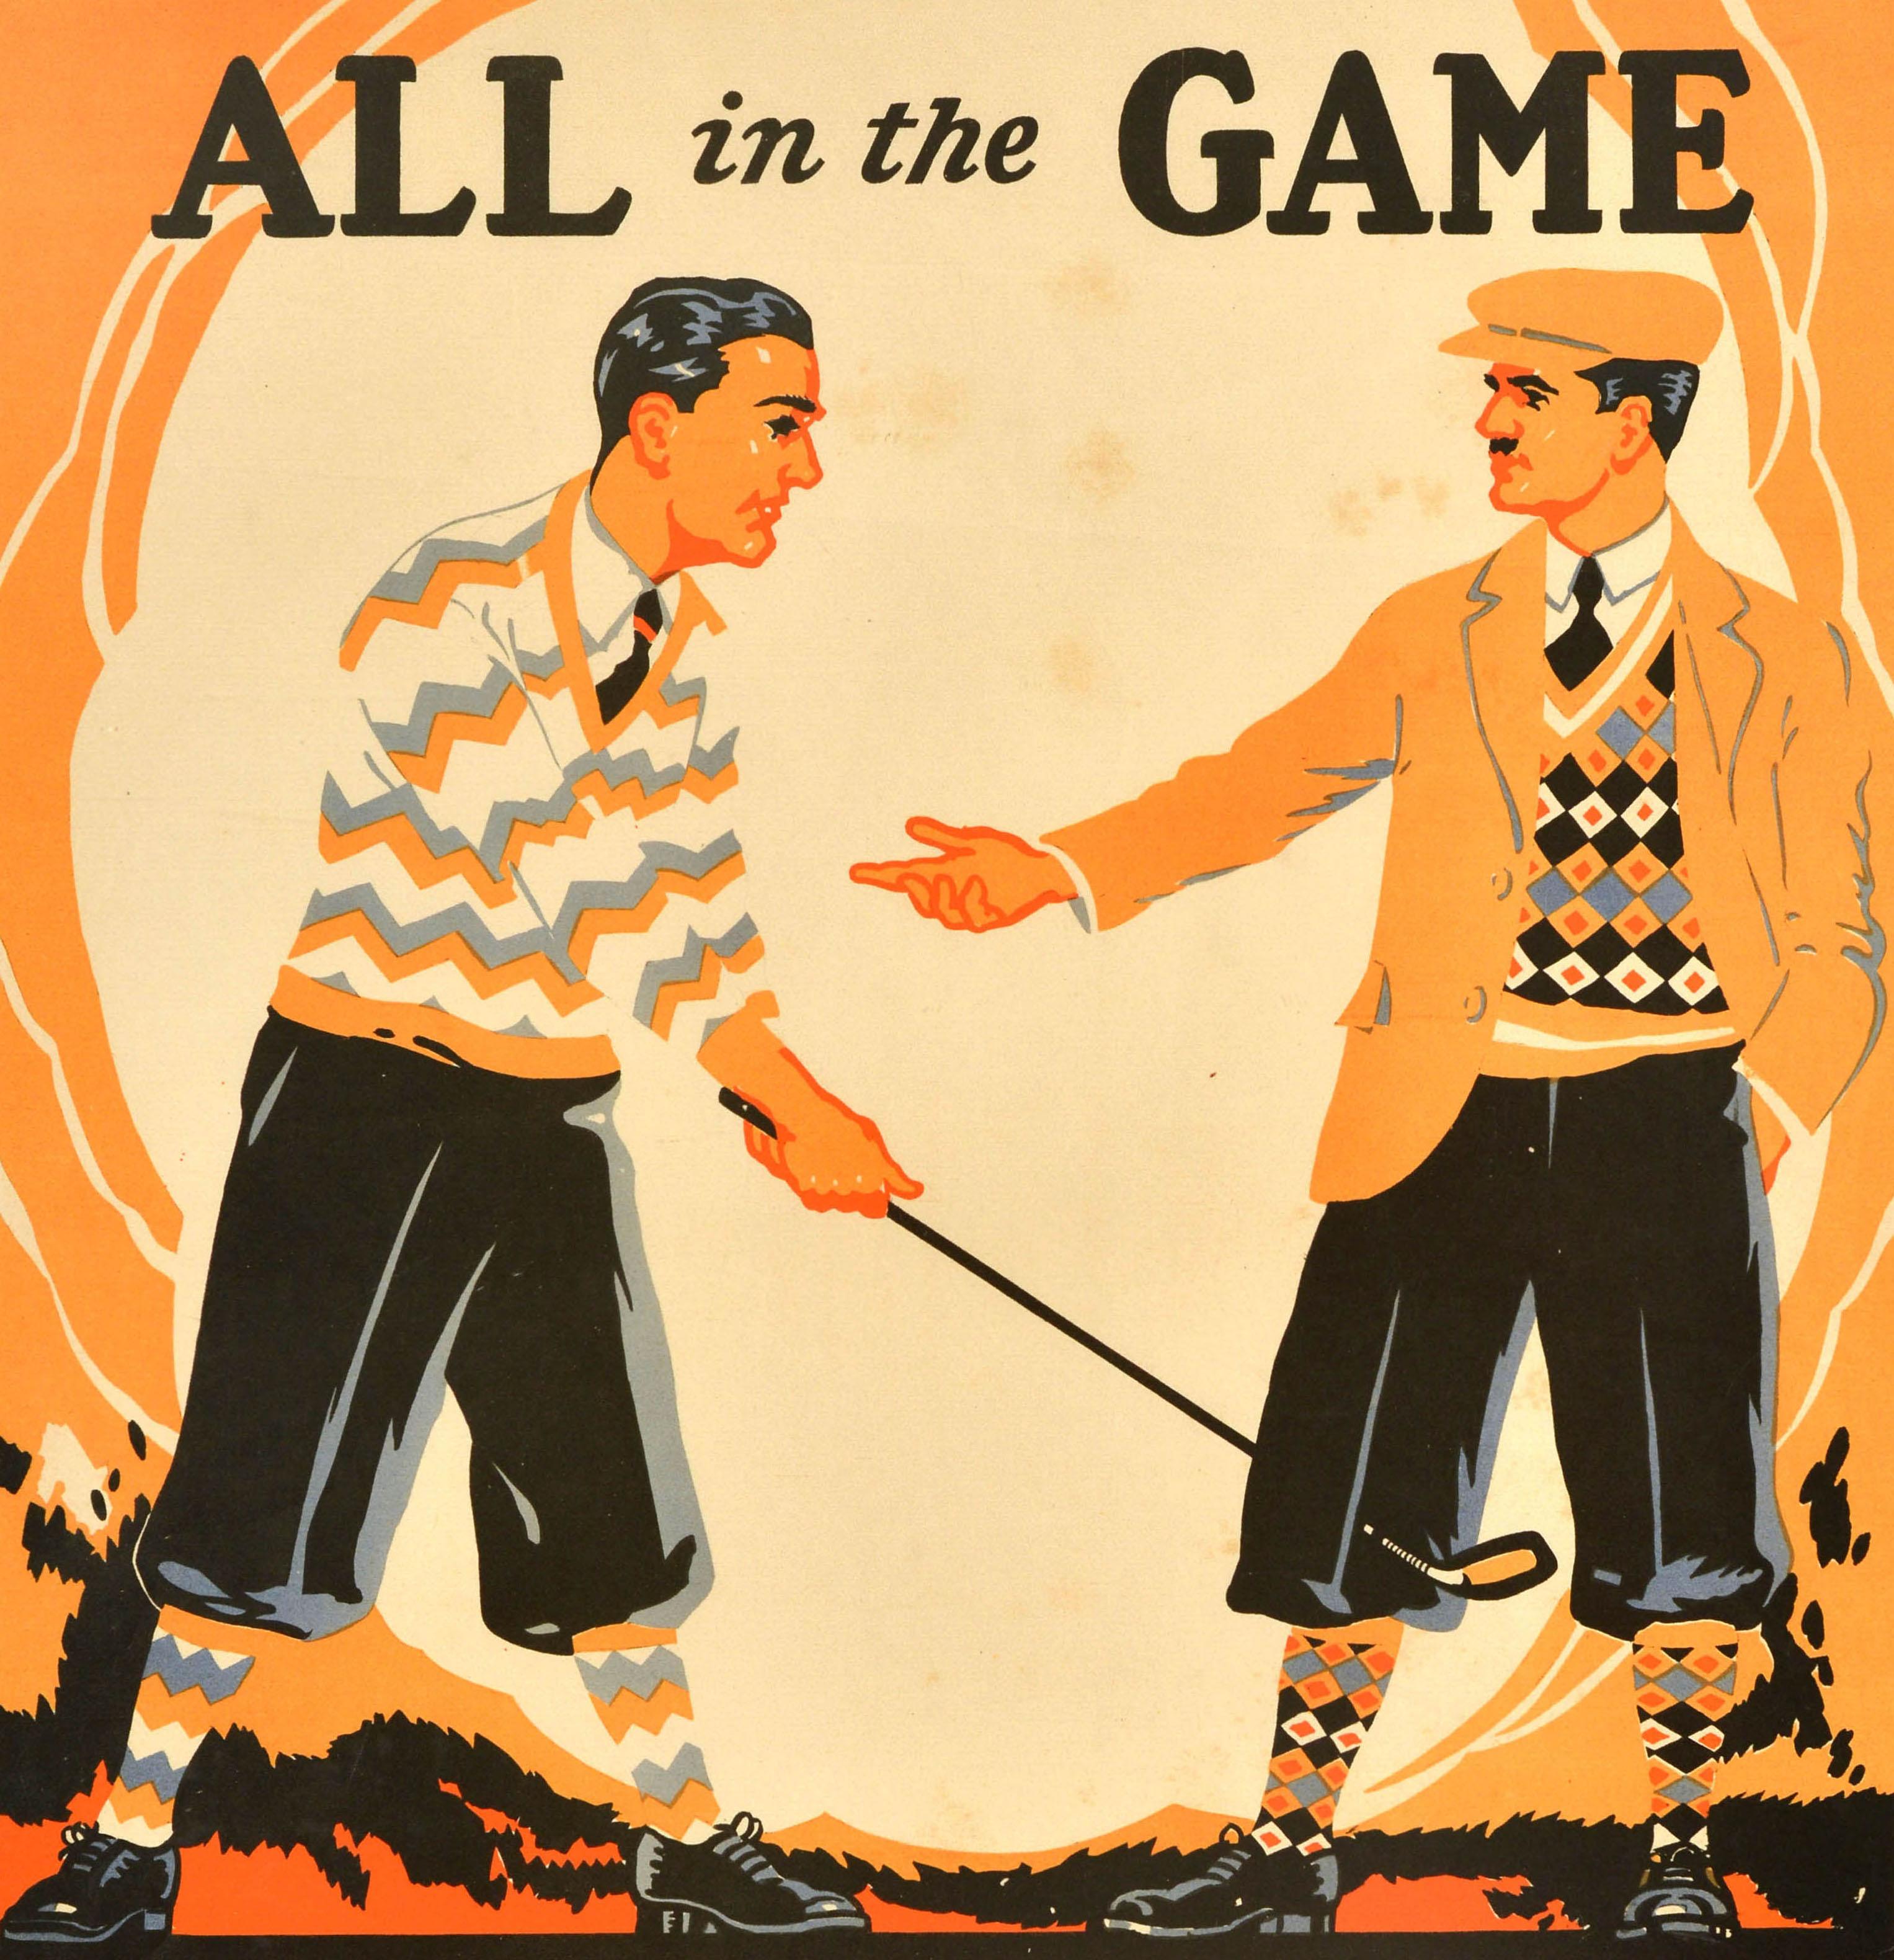 Original vintage workplace motivational poster - All in the Game Only those who accept criticism in the right spirit qualify to win Listeners Learn to Lead Bill Jones - featuring a sport themed illustration of golf players wearing colourful jumpers